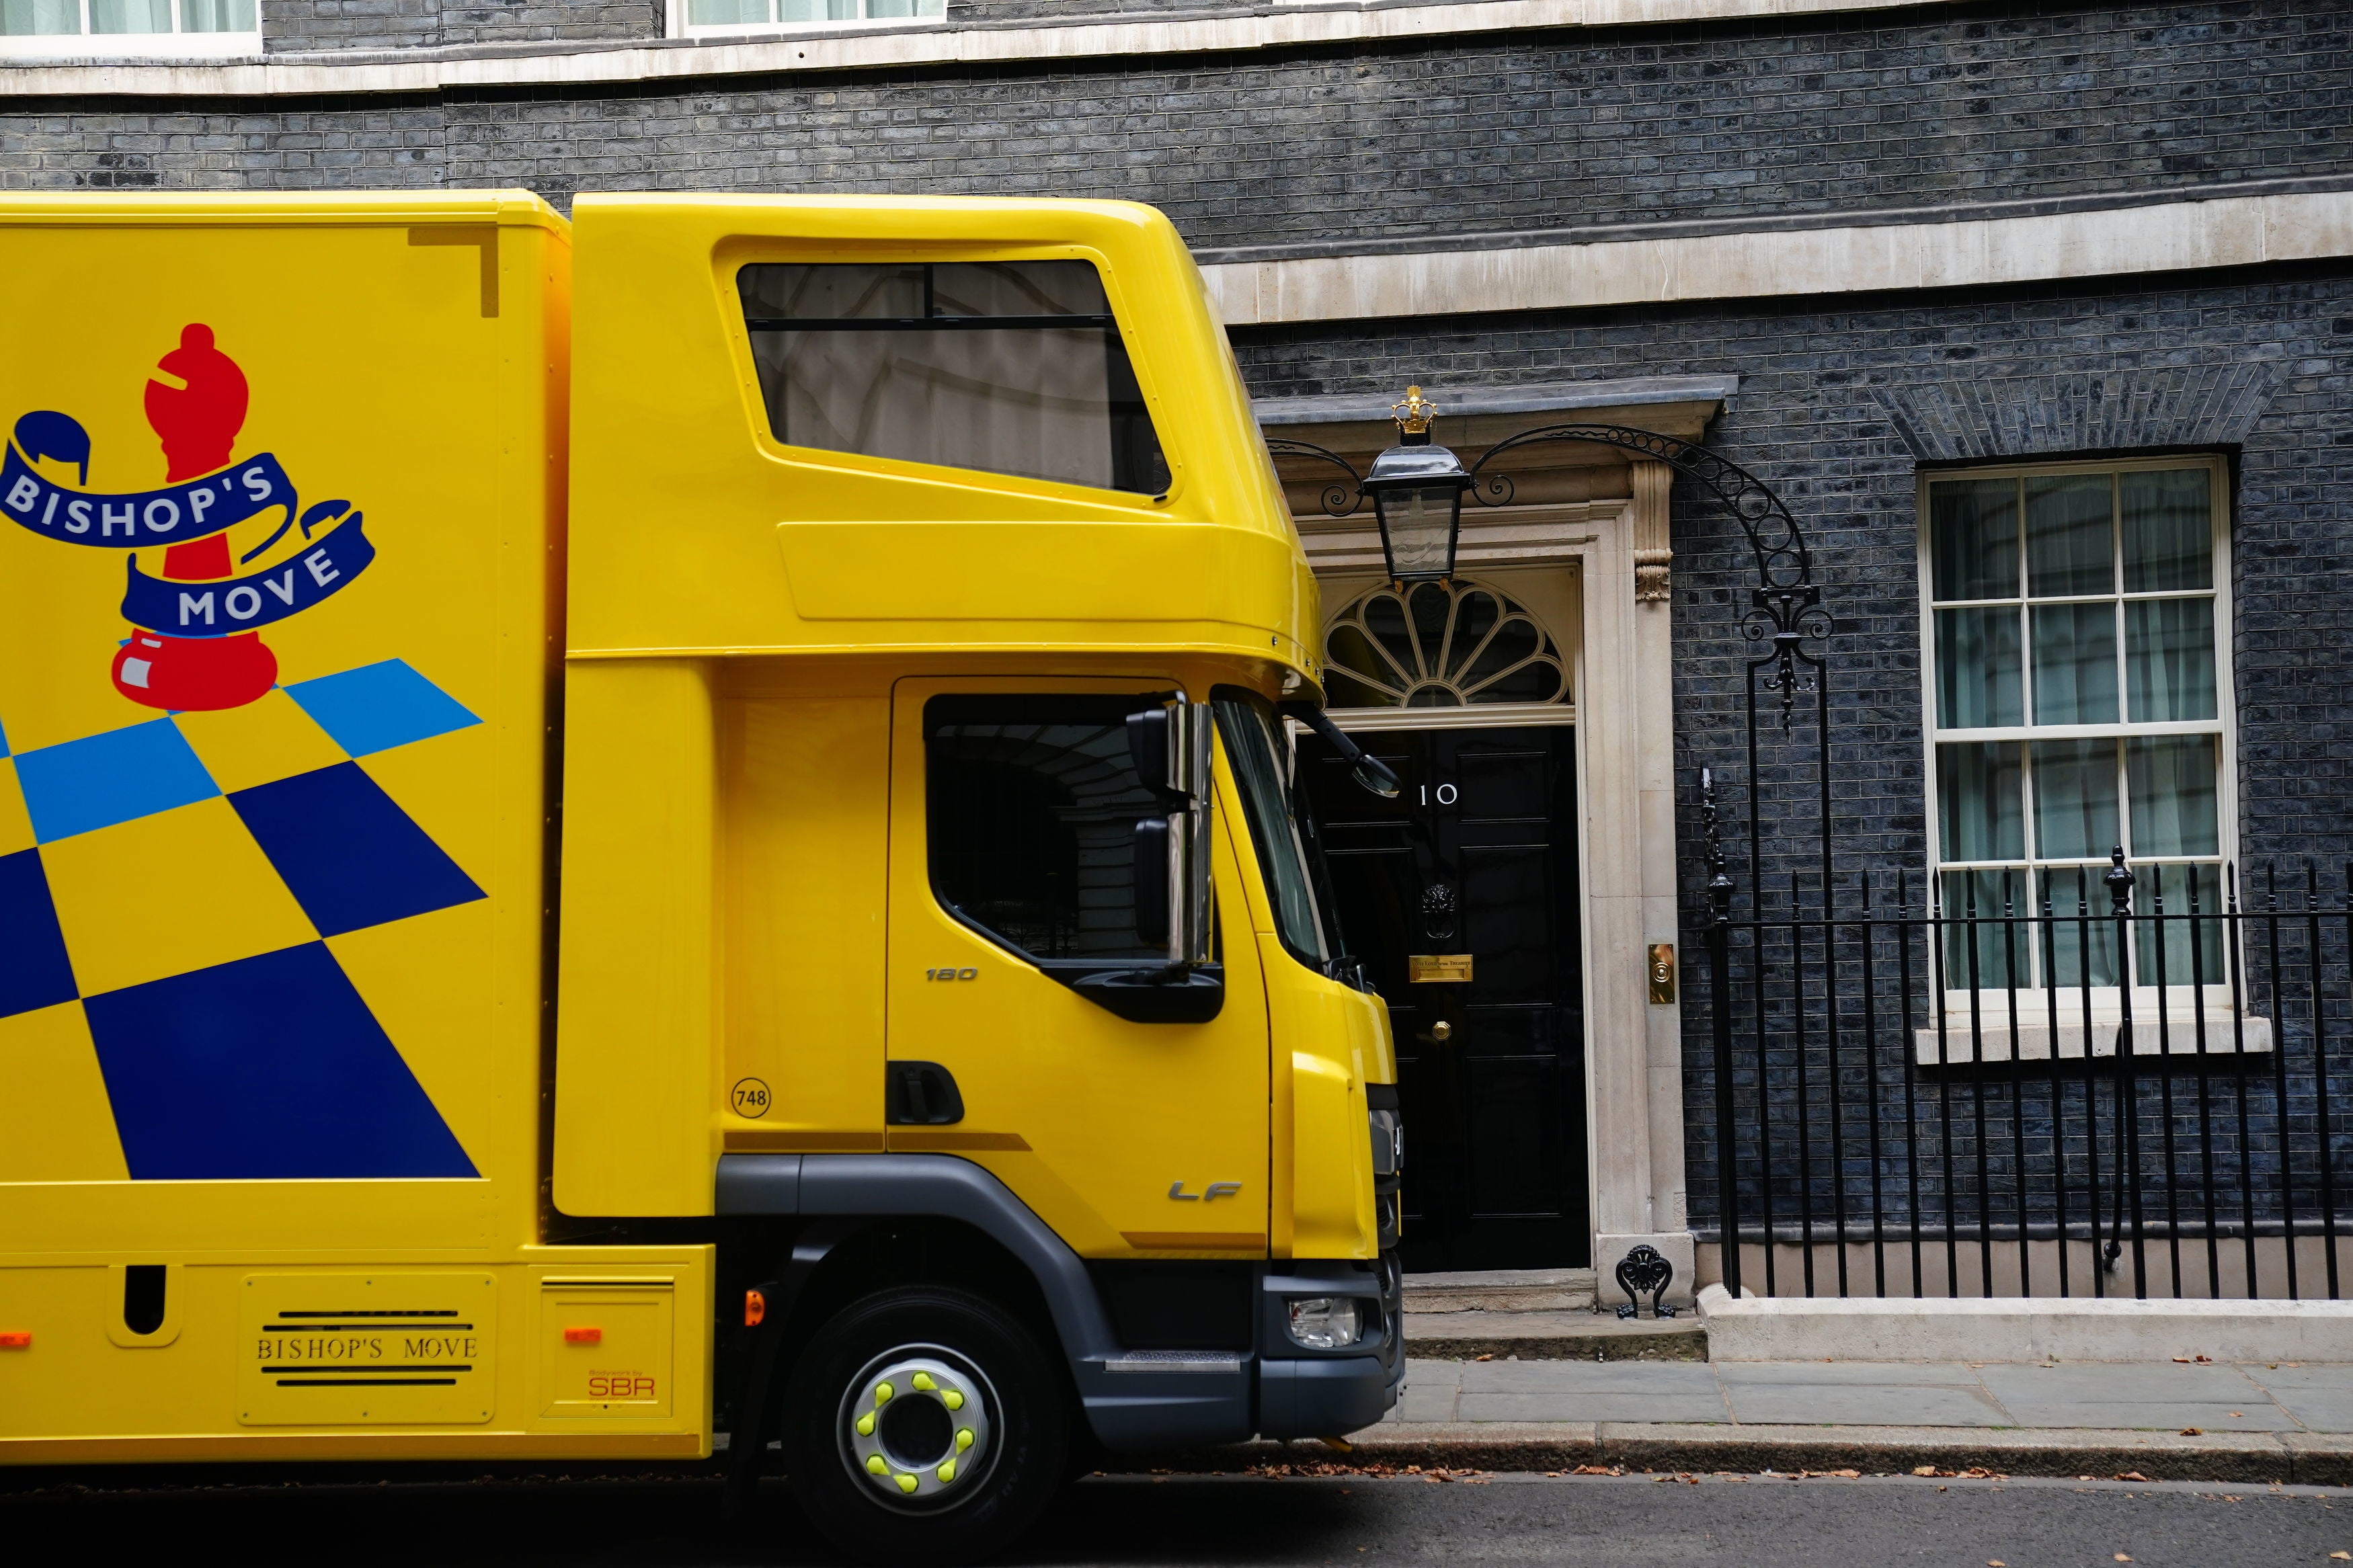 Packing up: the removal van stands ready outside No 10